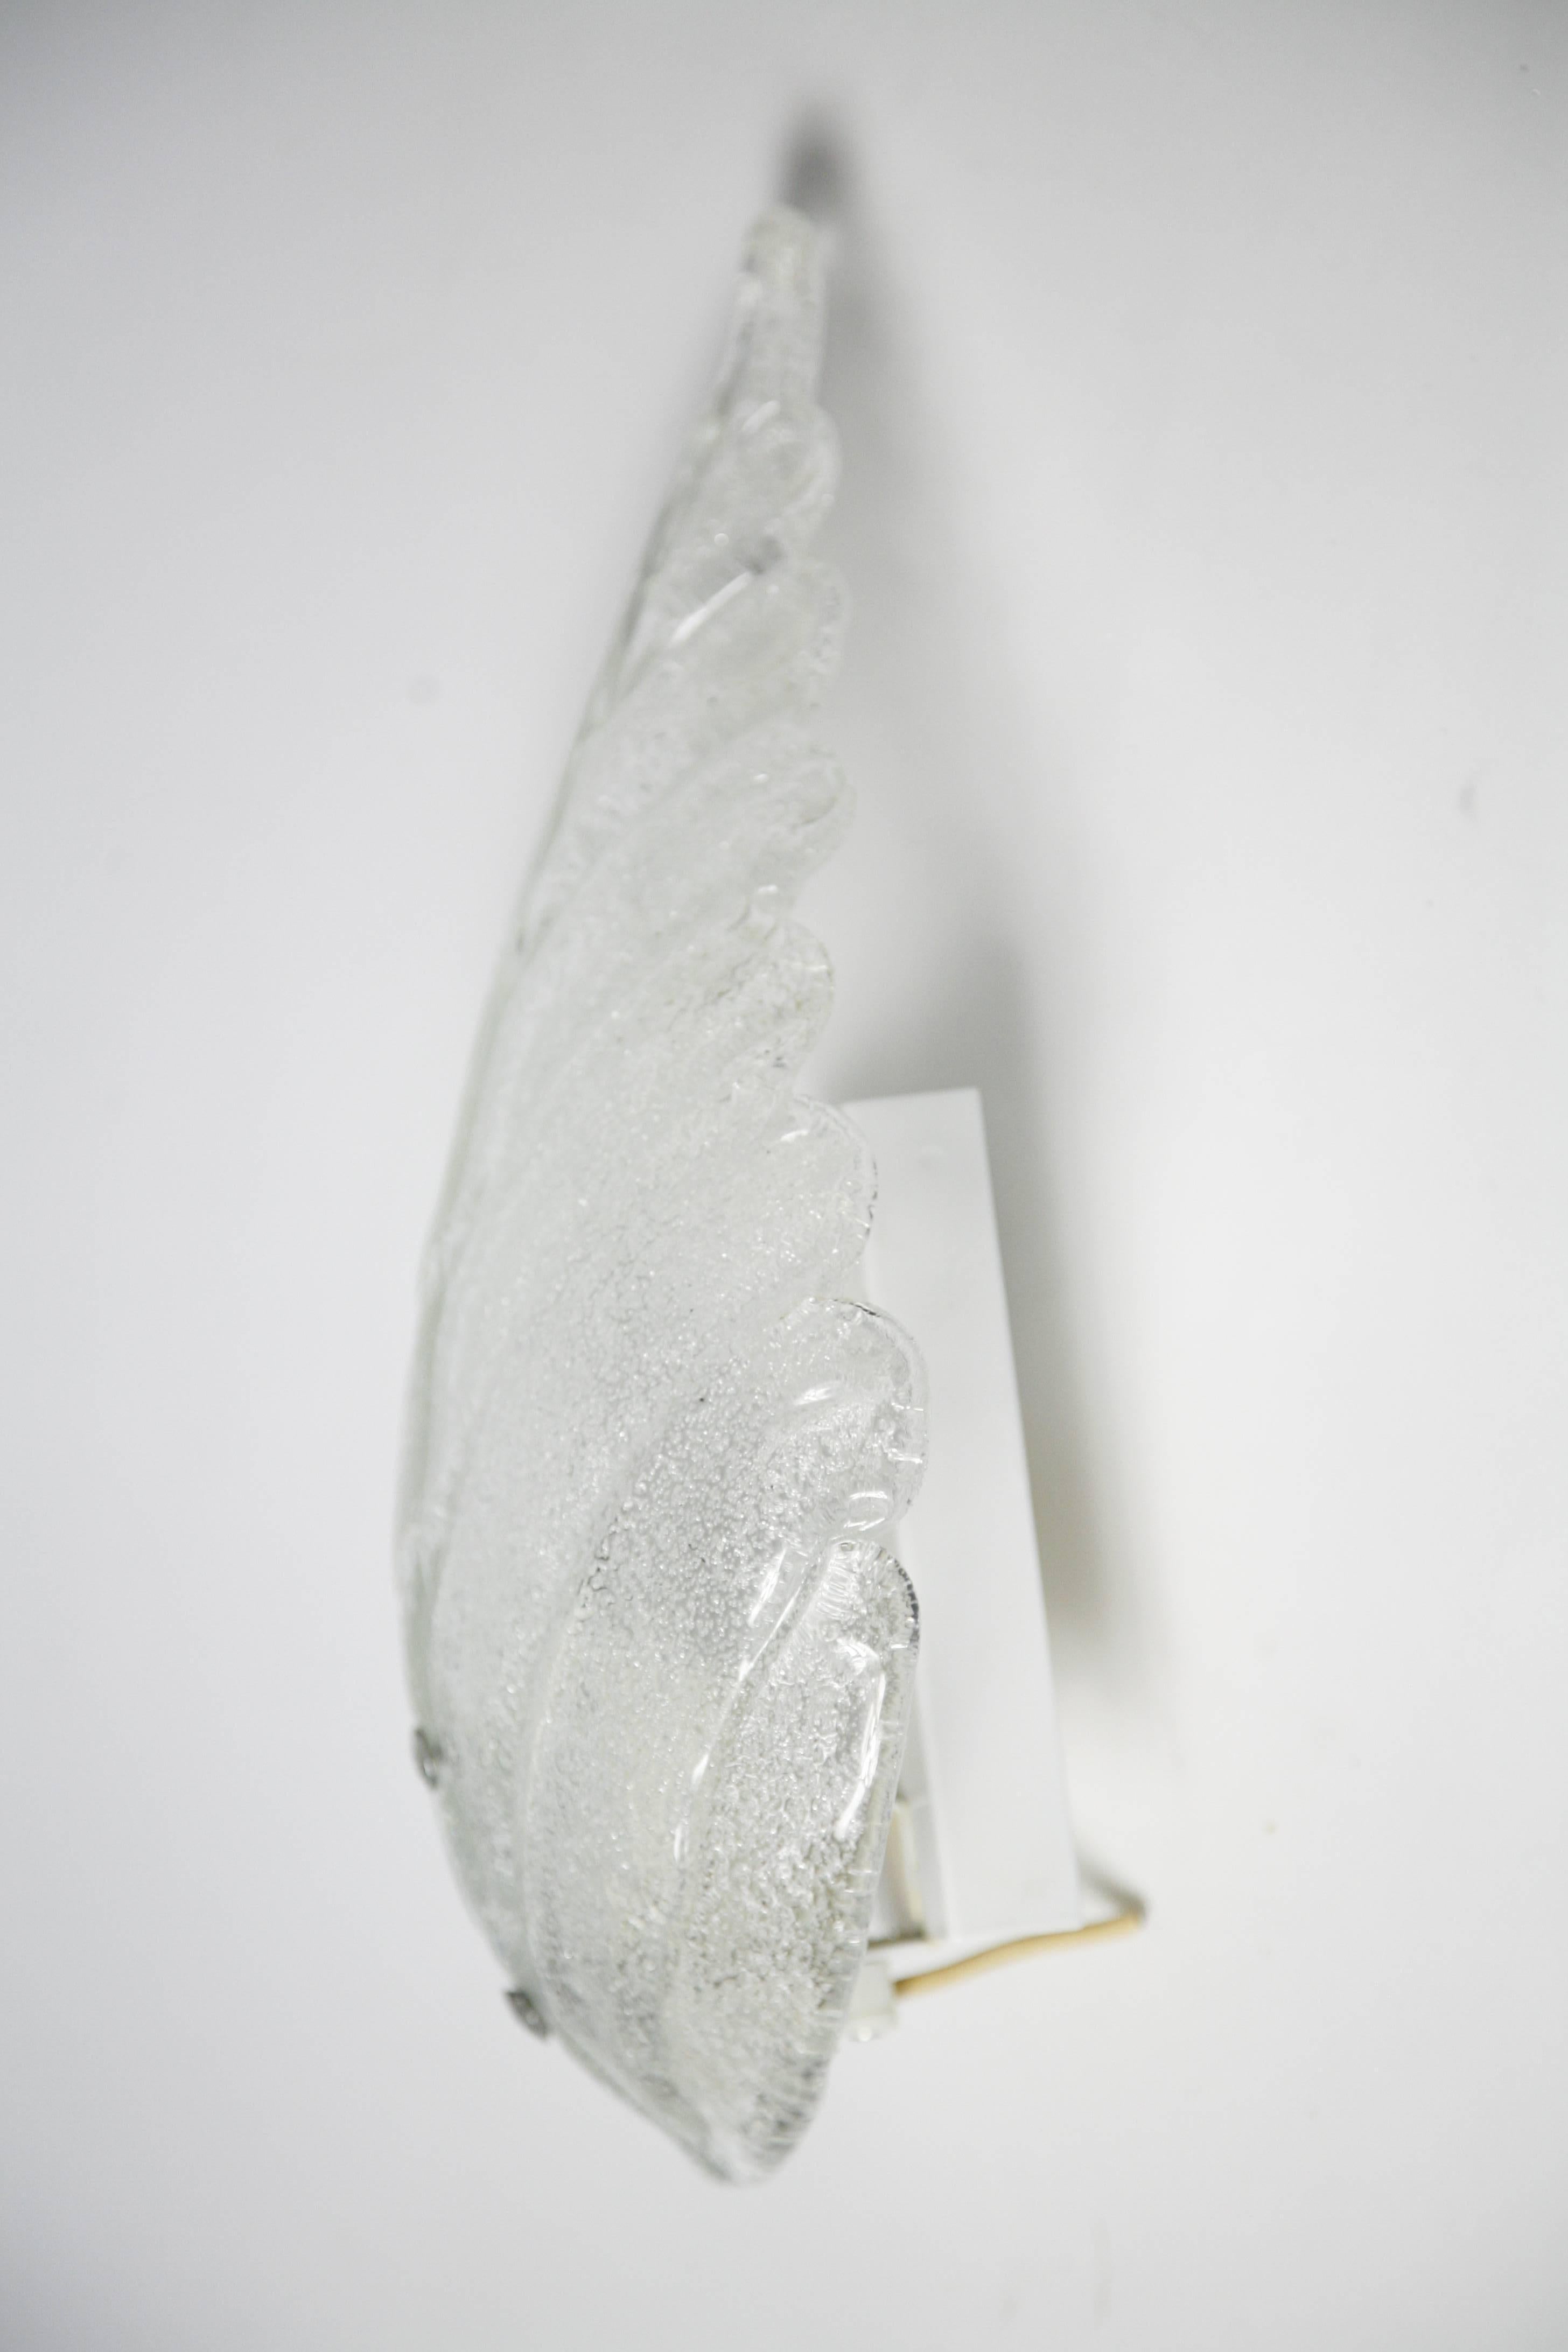 Kaiser Glass Leaf Shaped Sconces, Germany, 1970 In Good Condition For Sale In Bronx, NY